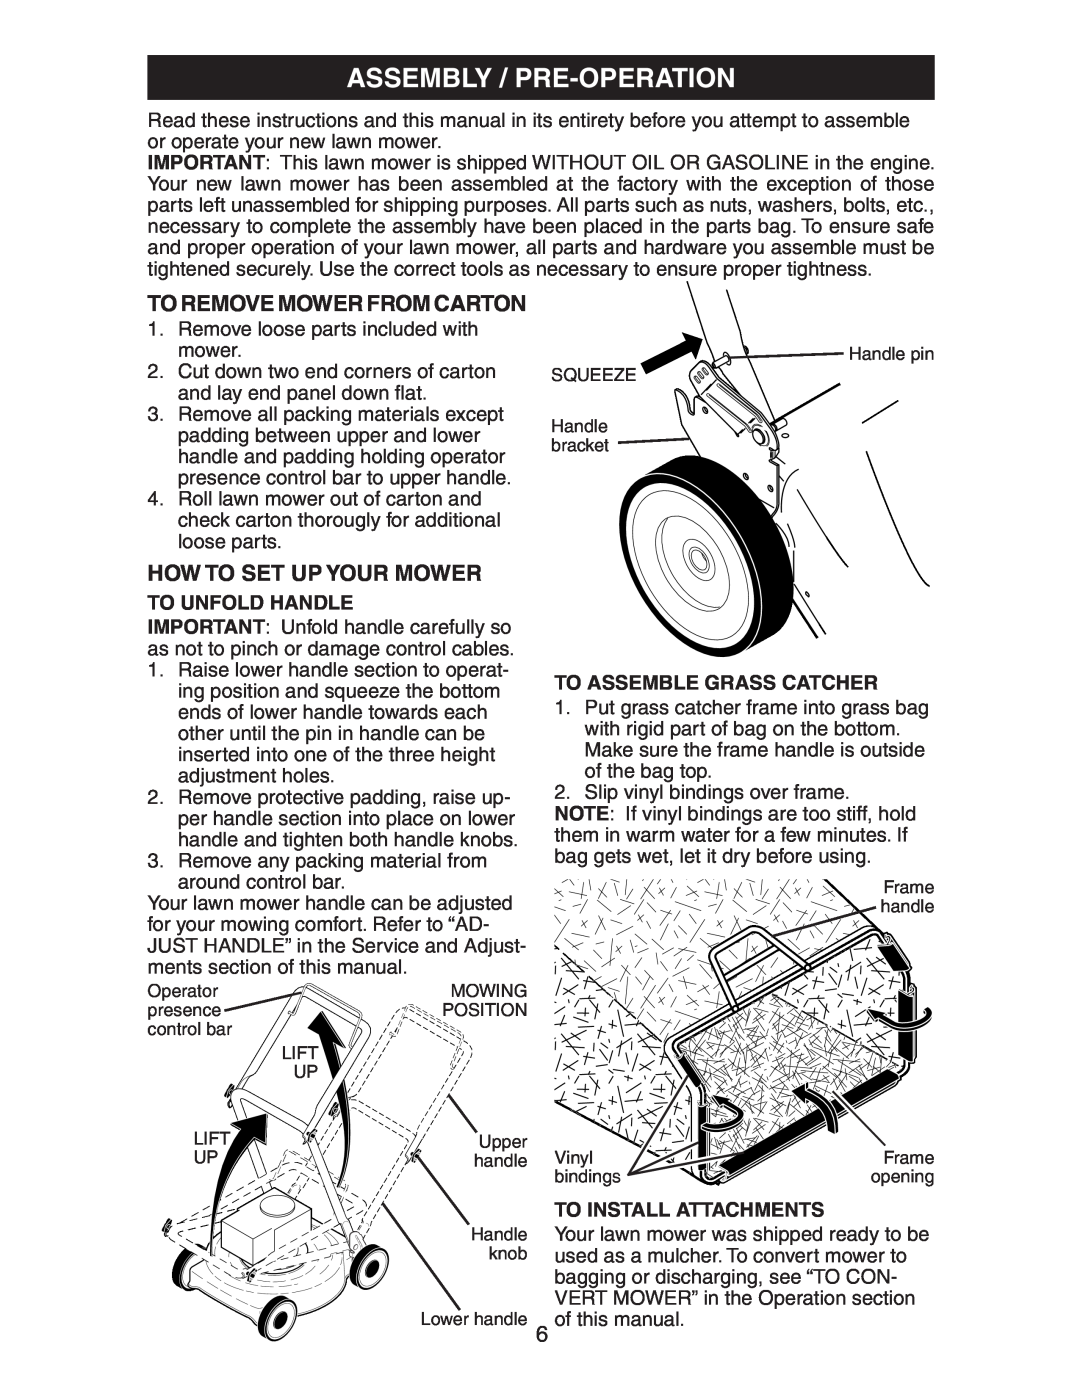 Husqvarna 917.37583 owner manual Assembly / Pre-Operation, To Remove Mower From Carton, How To Set Up Your Mower 